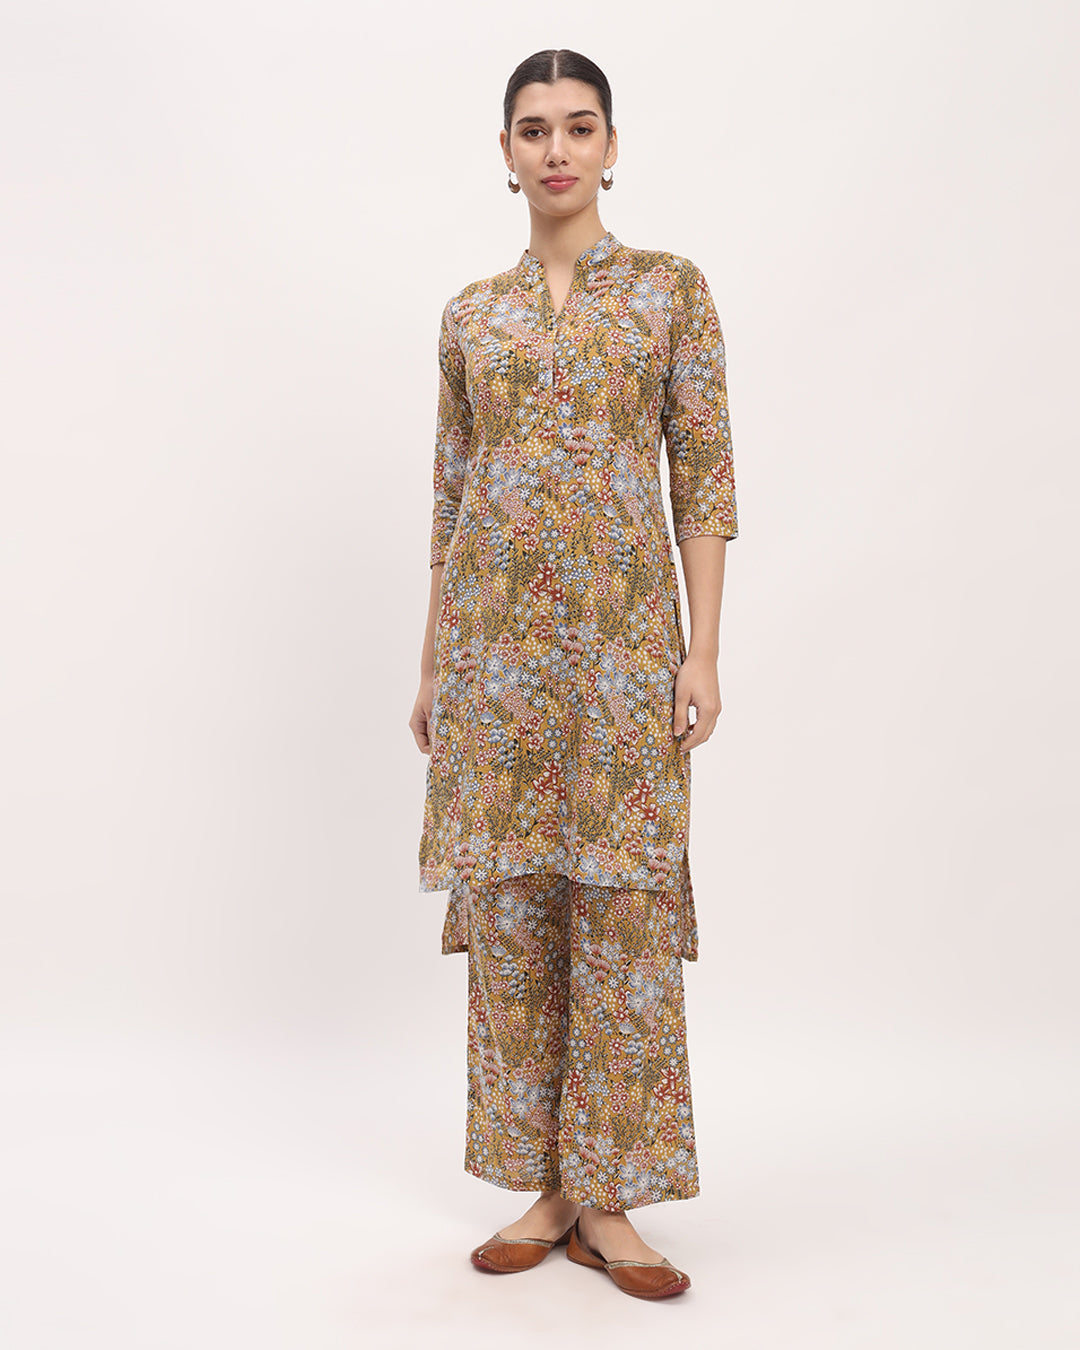 Combo: Golden Blossom & Lavender Paisley High-Low Printed Kurta (Without Bottoms)